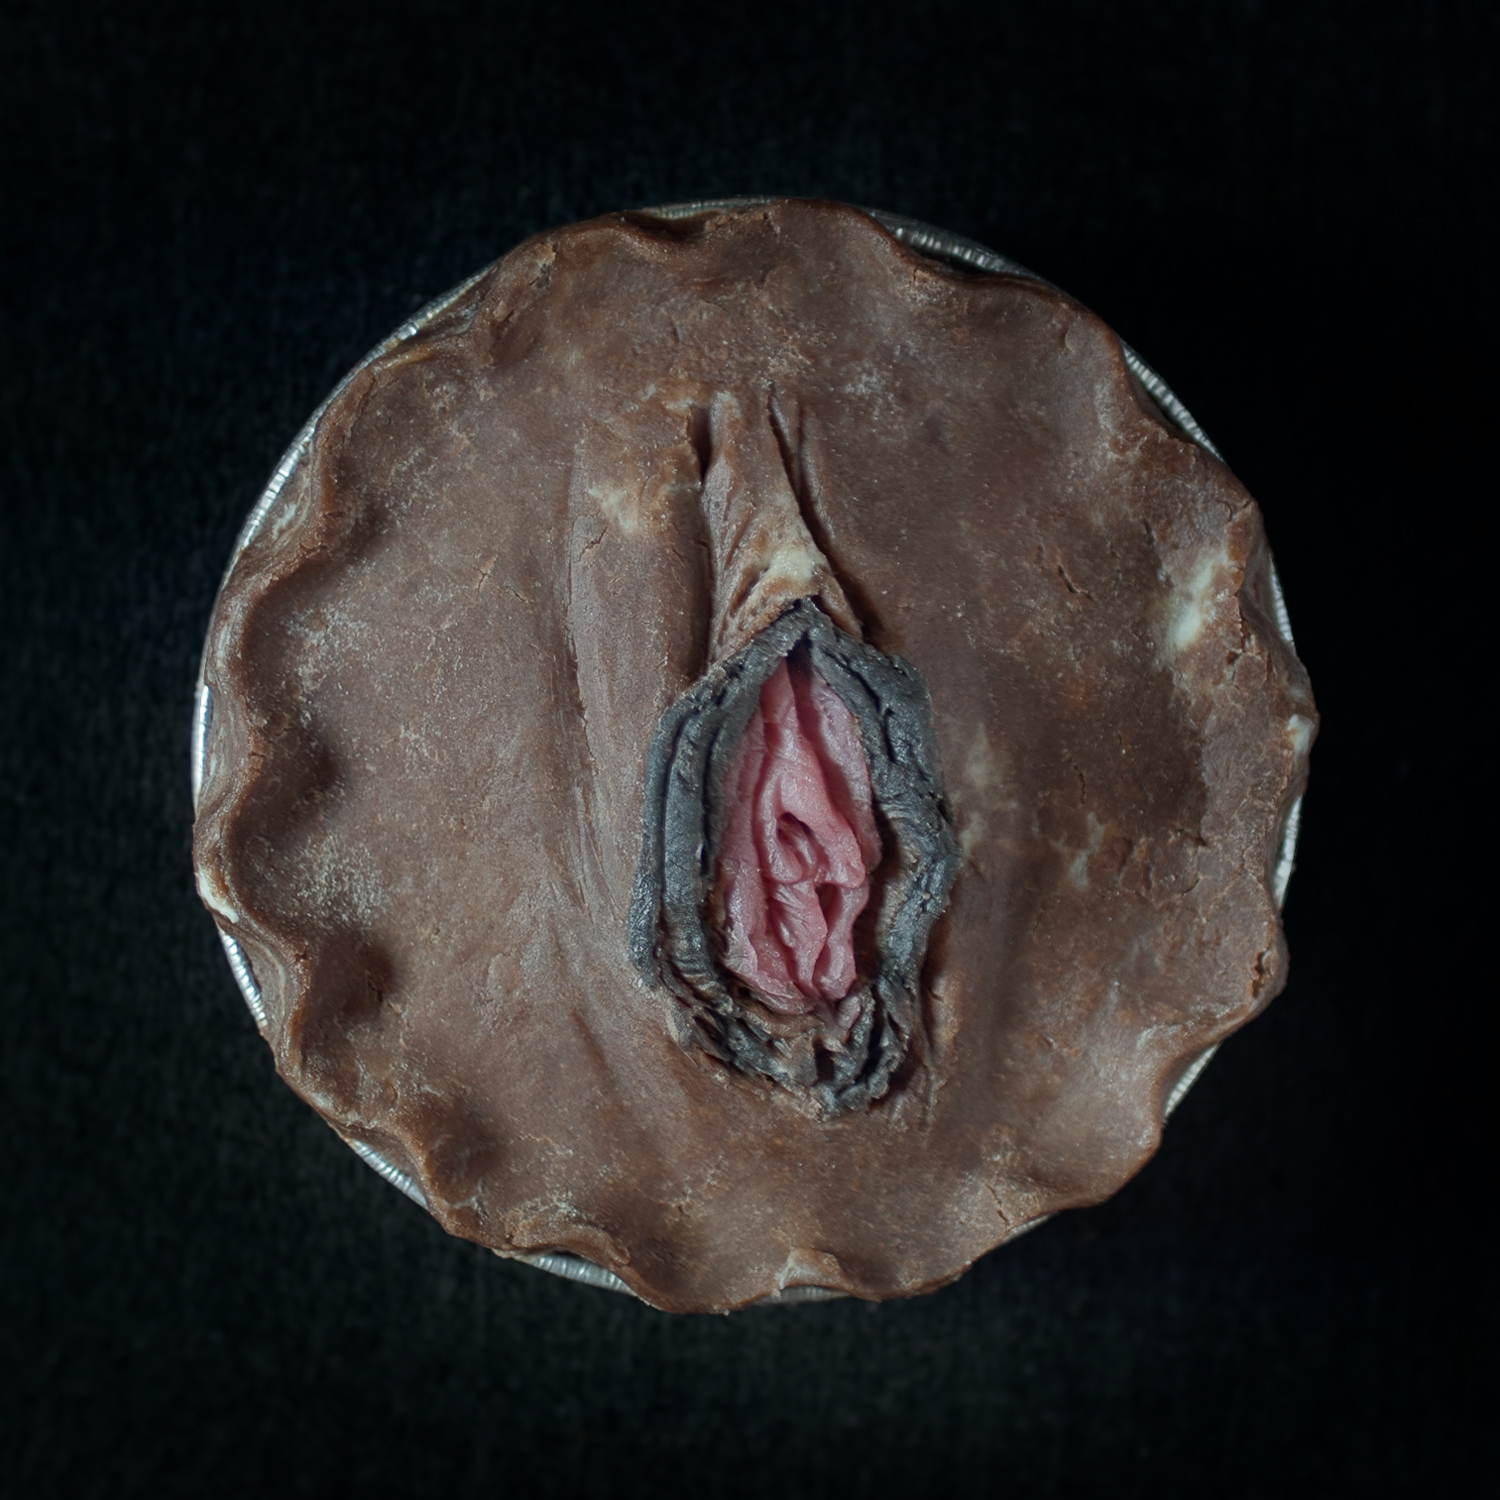 Pie 28, a pie sculpted to look like a realistic vulva
